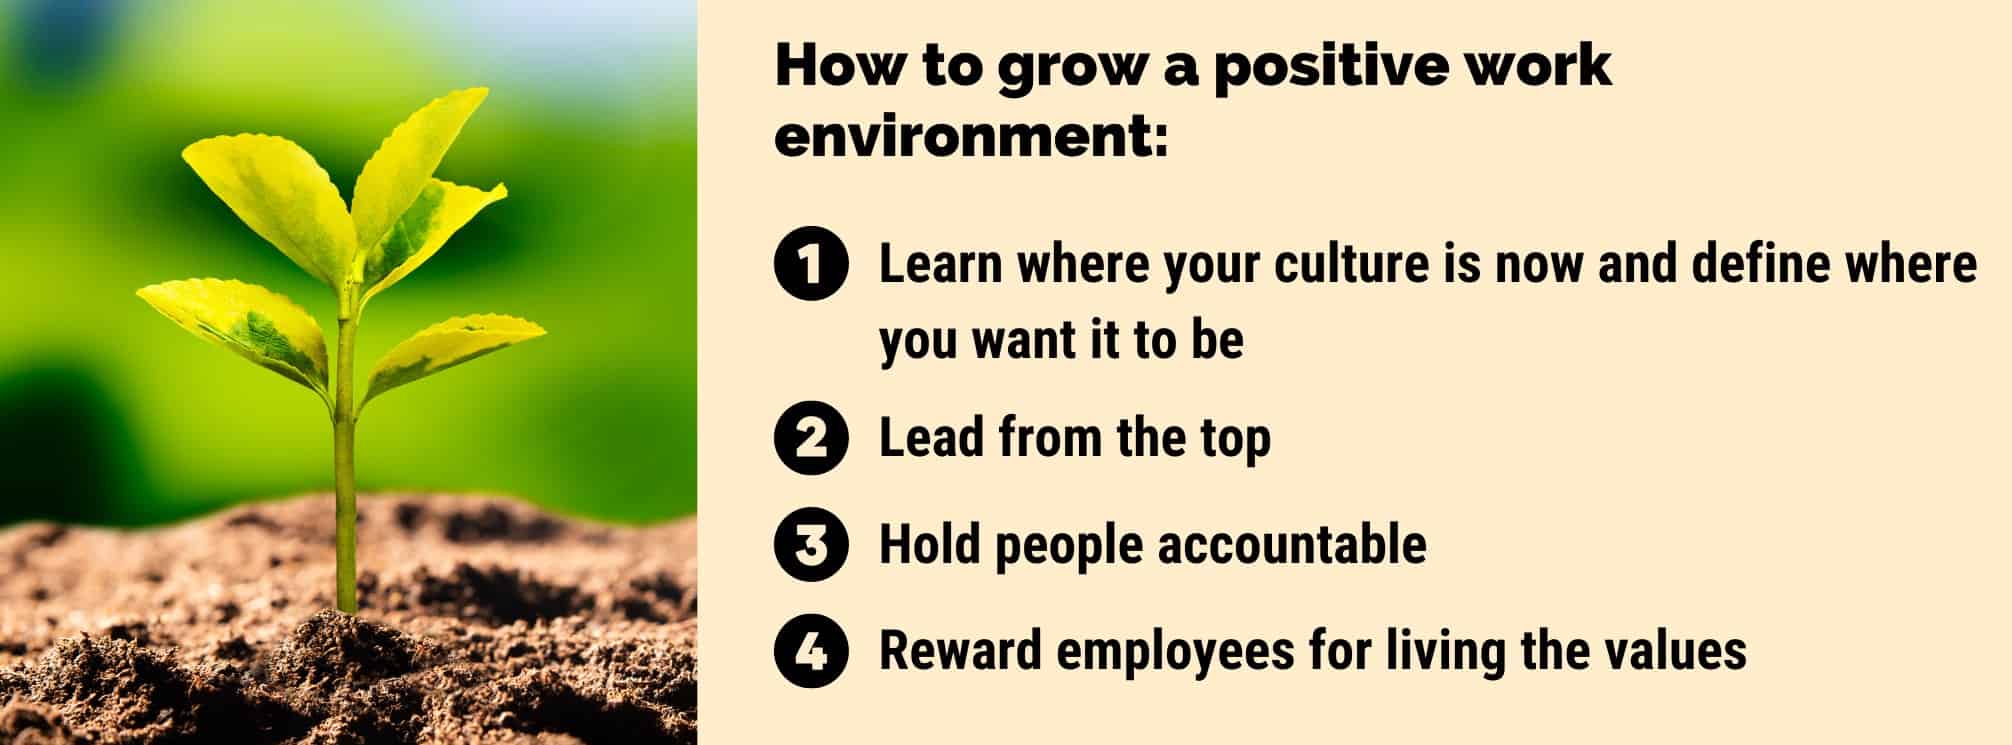 graphic with a seedling growing with the text "how to grow a positive work environment" with 4 tips listed